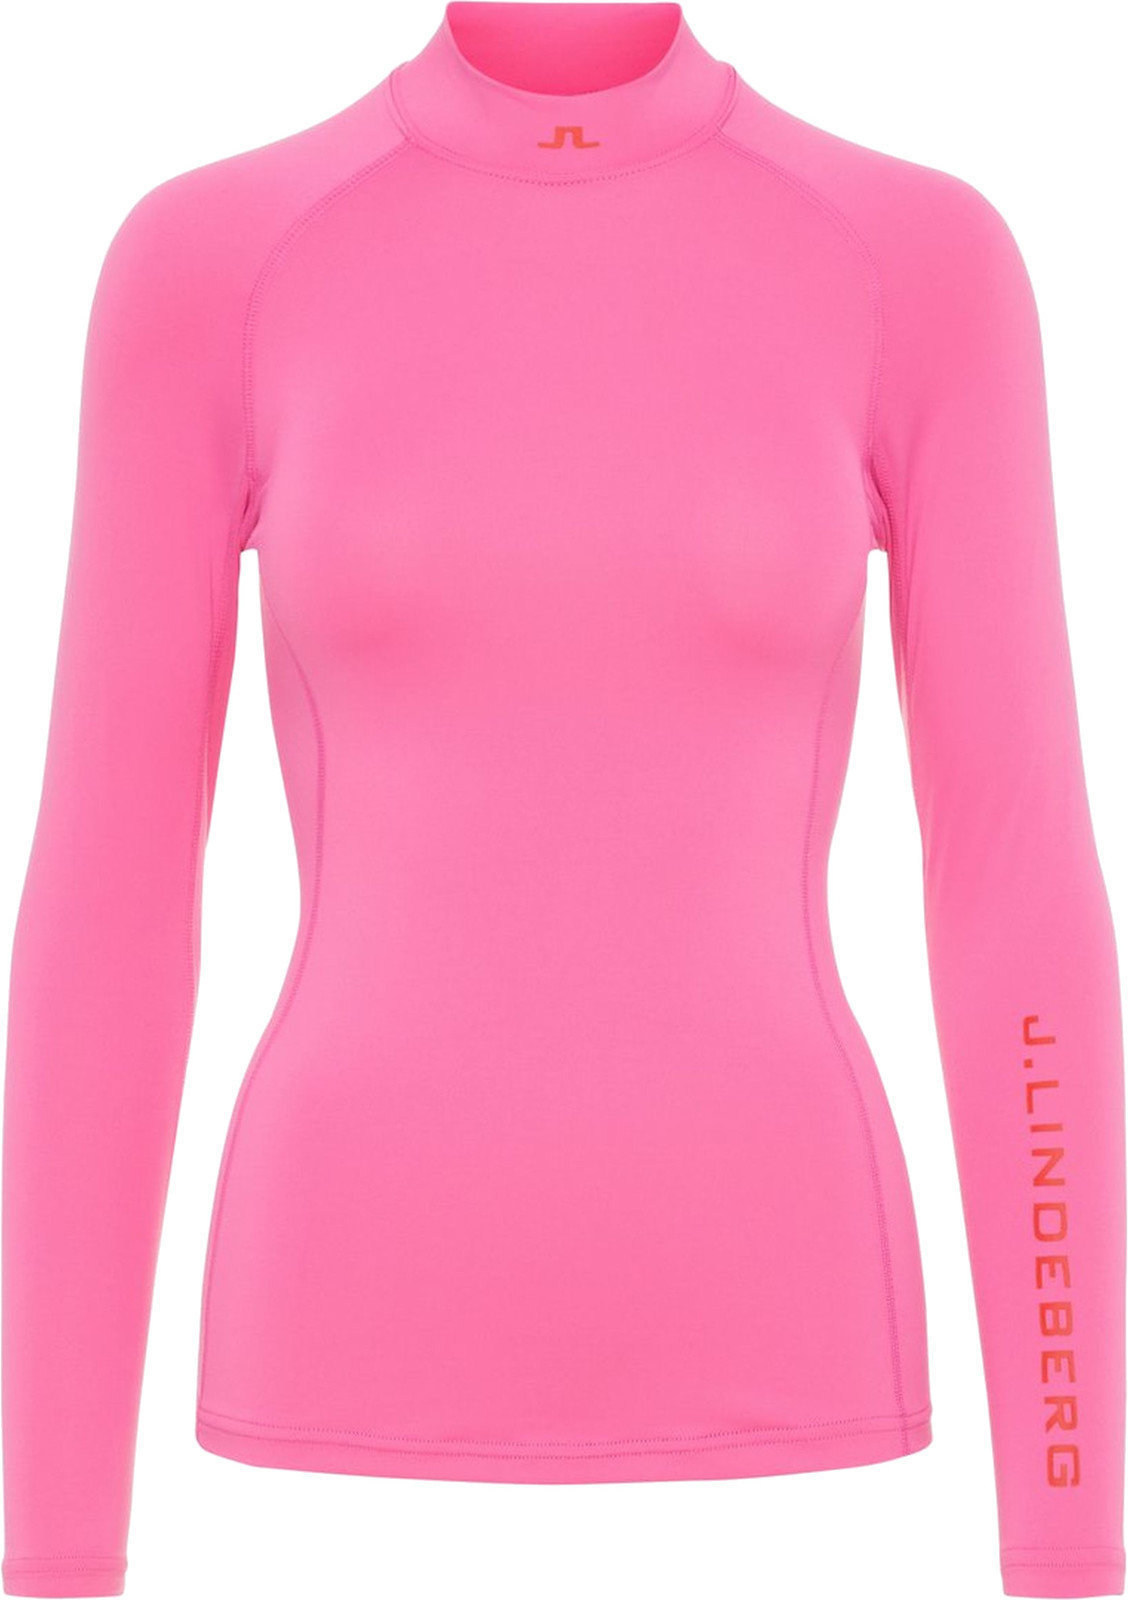 Thermal Clothing J.Lindeberg Asa Soft Compression Womens Base Layer Pop Pink S